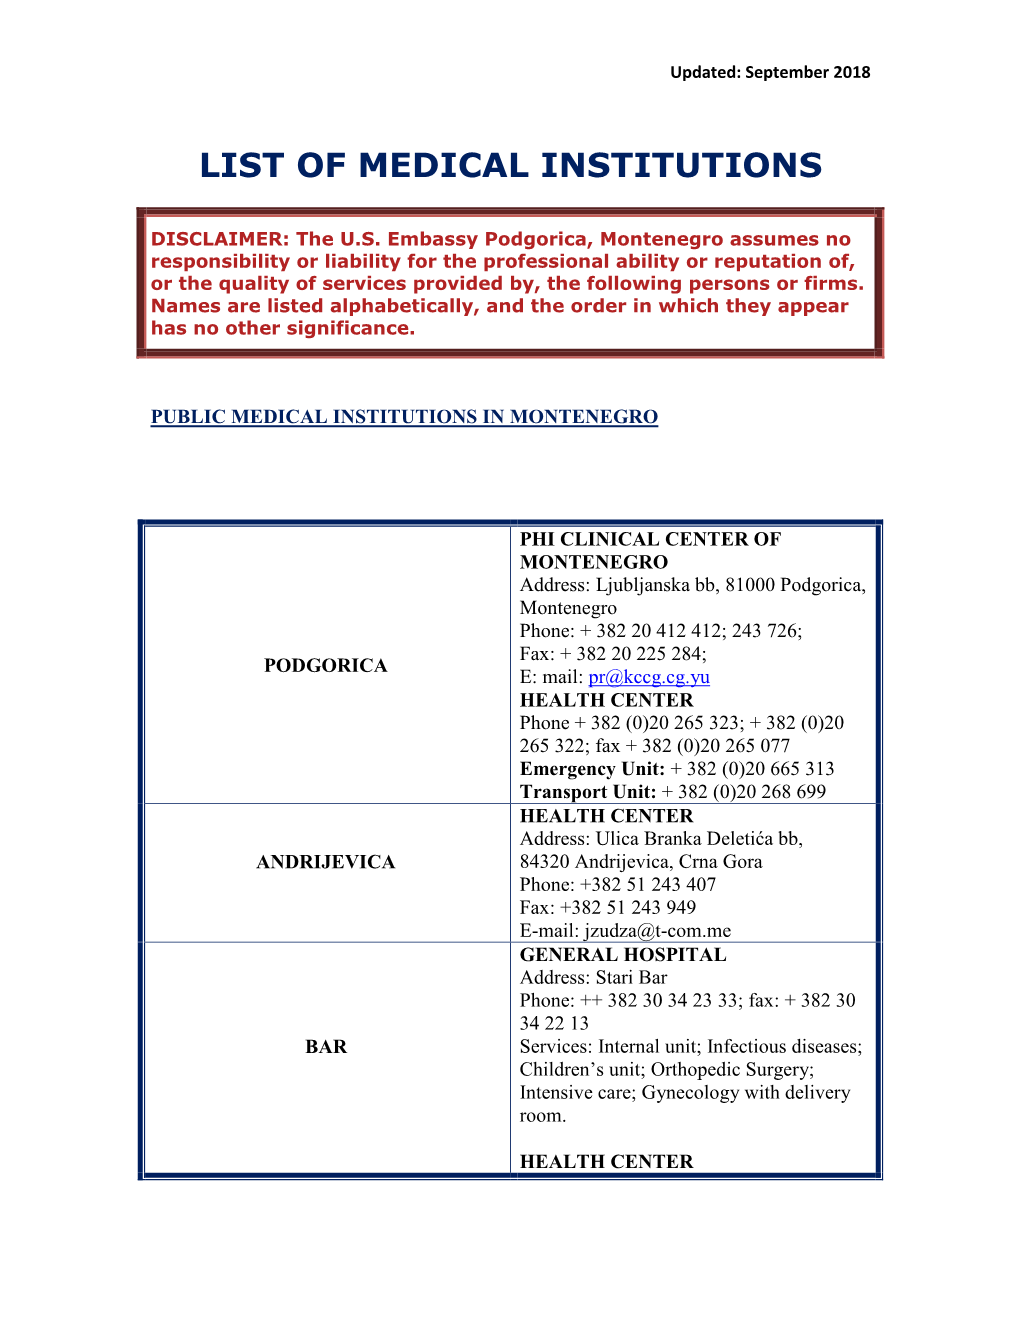 List of Medical Institutions